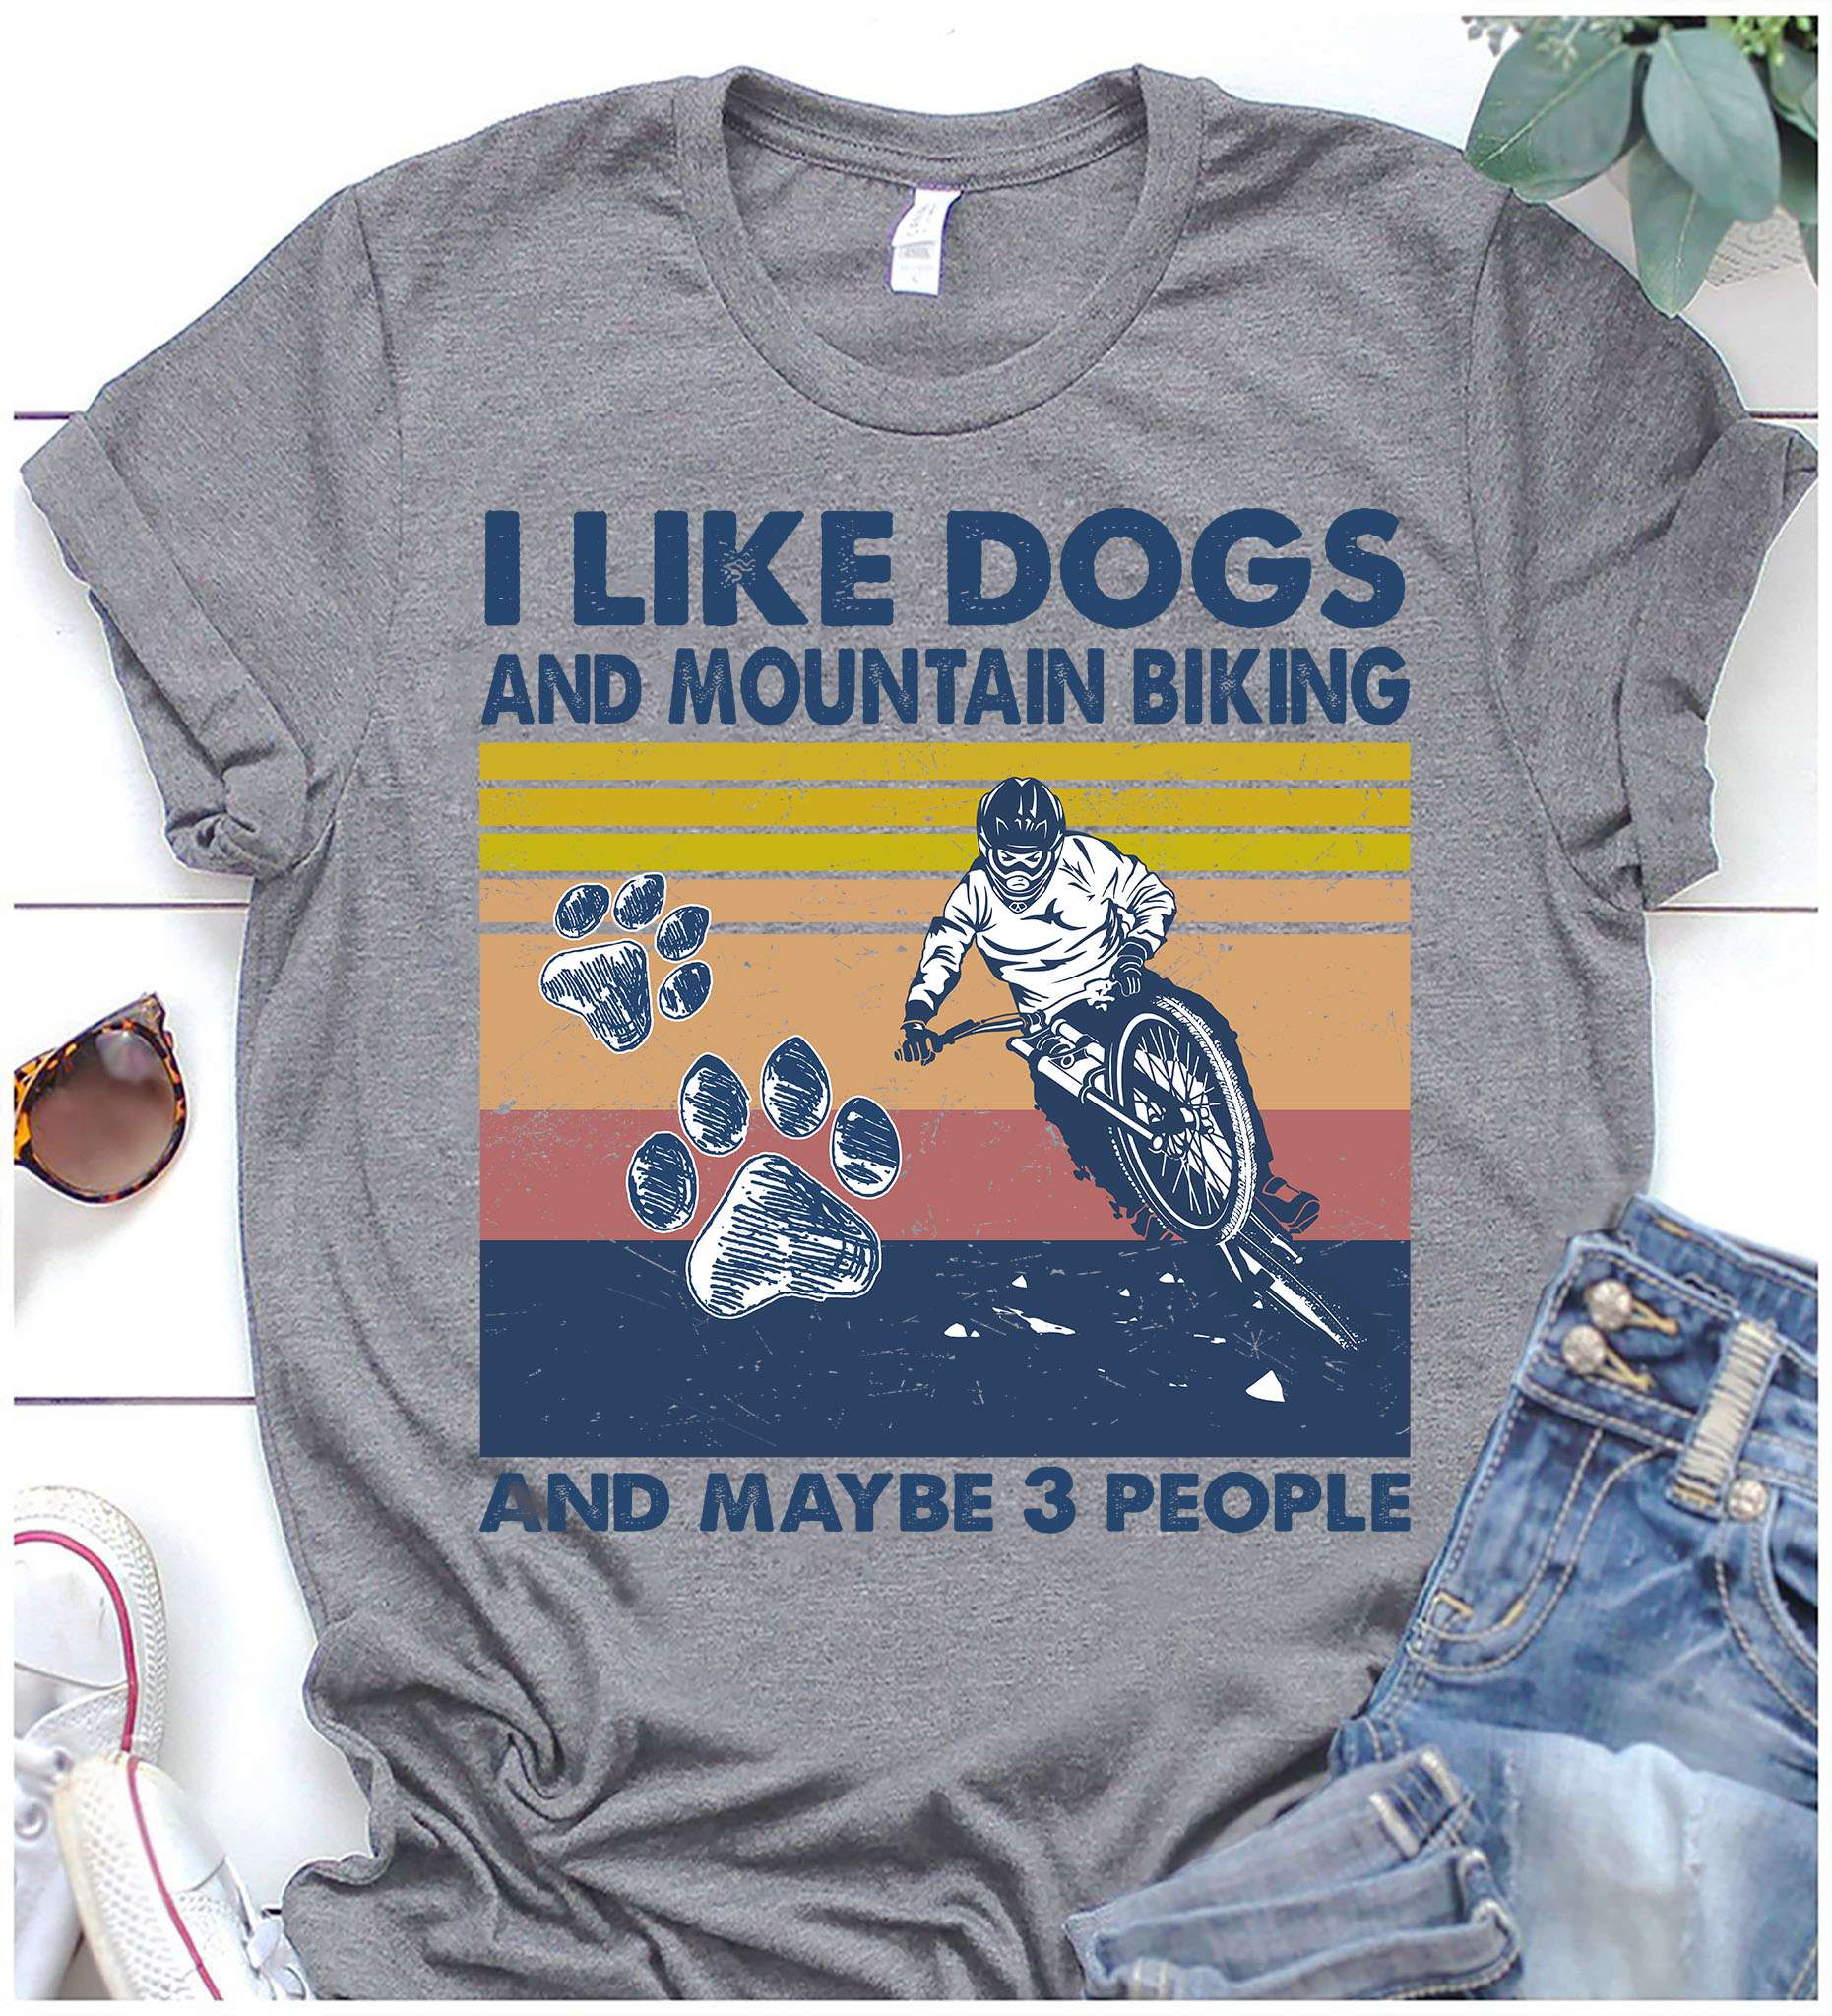 Mountain Biking And Dogs - I like dogs and mountain biking and maybe 3 people